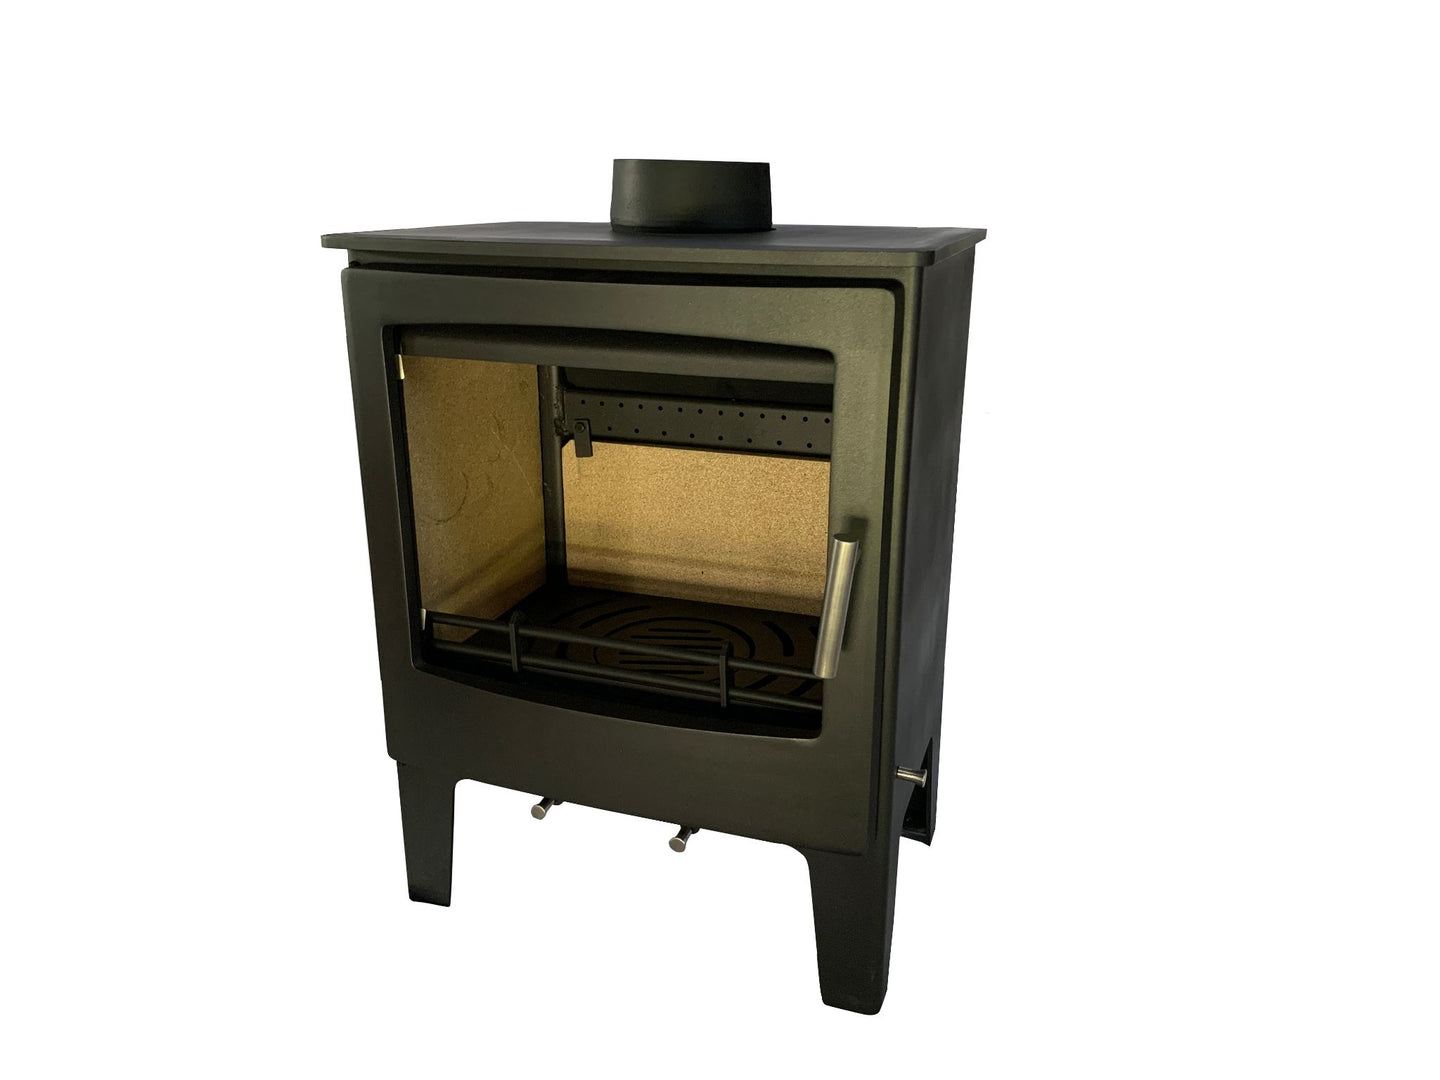 CF805-T Small steel wood stove 8kw External air introduction model Cozy Fire